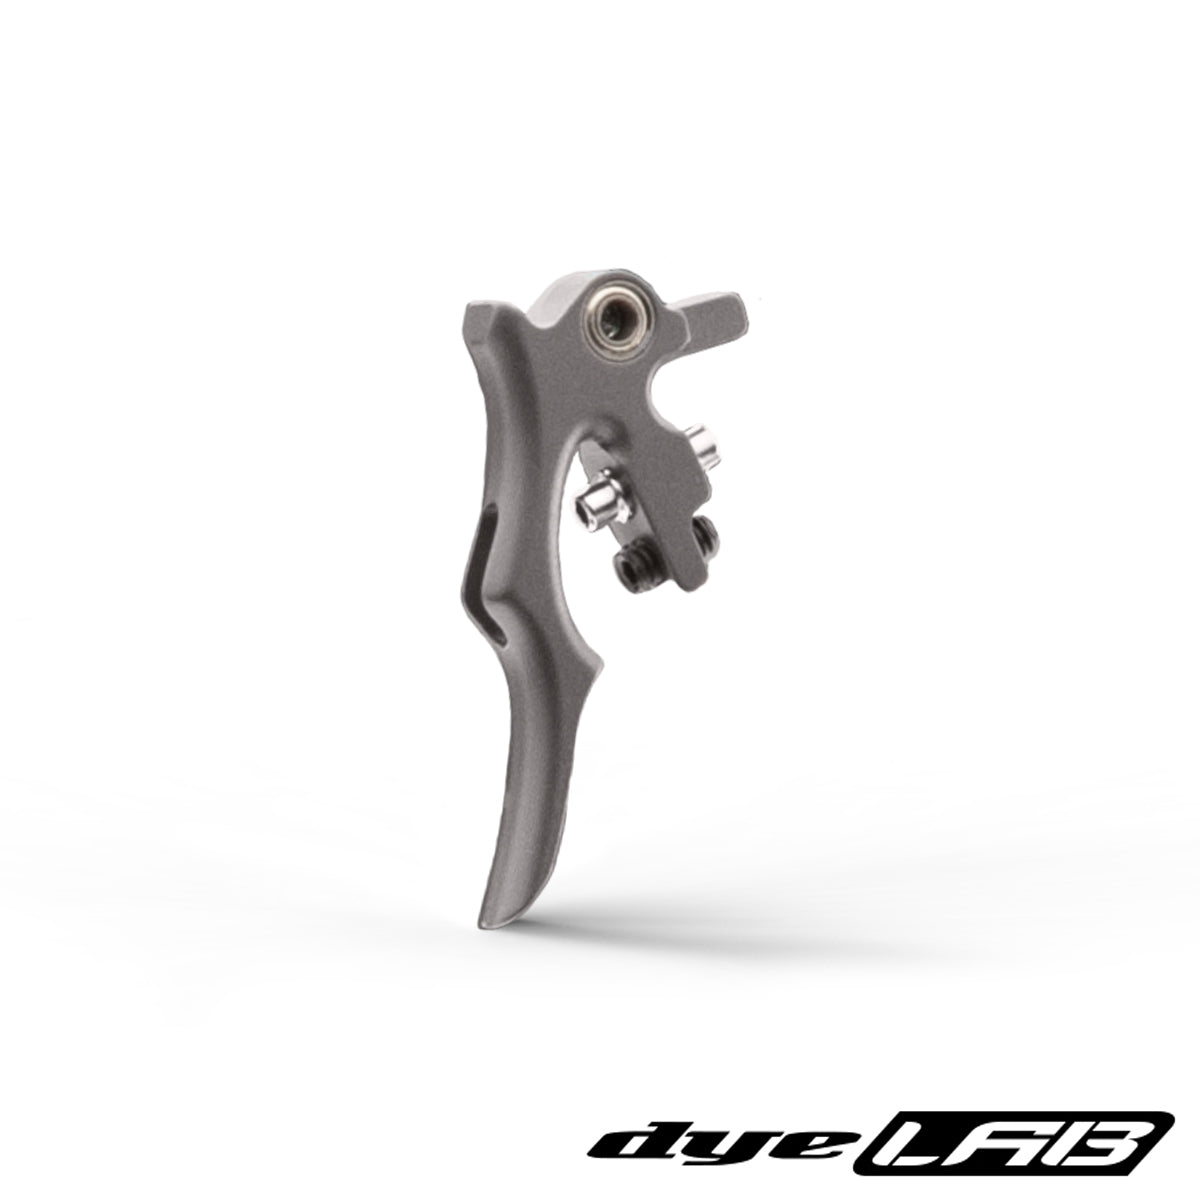 BWING21 DSR Aluminum Trigger - Eminent Paintball And Airsoft